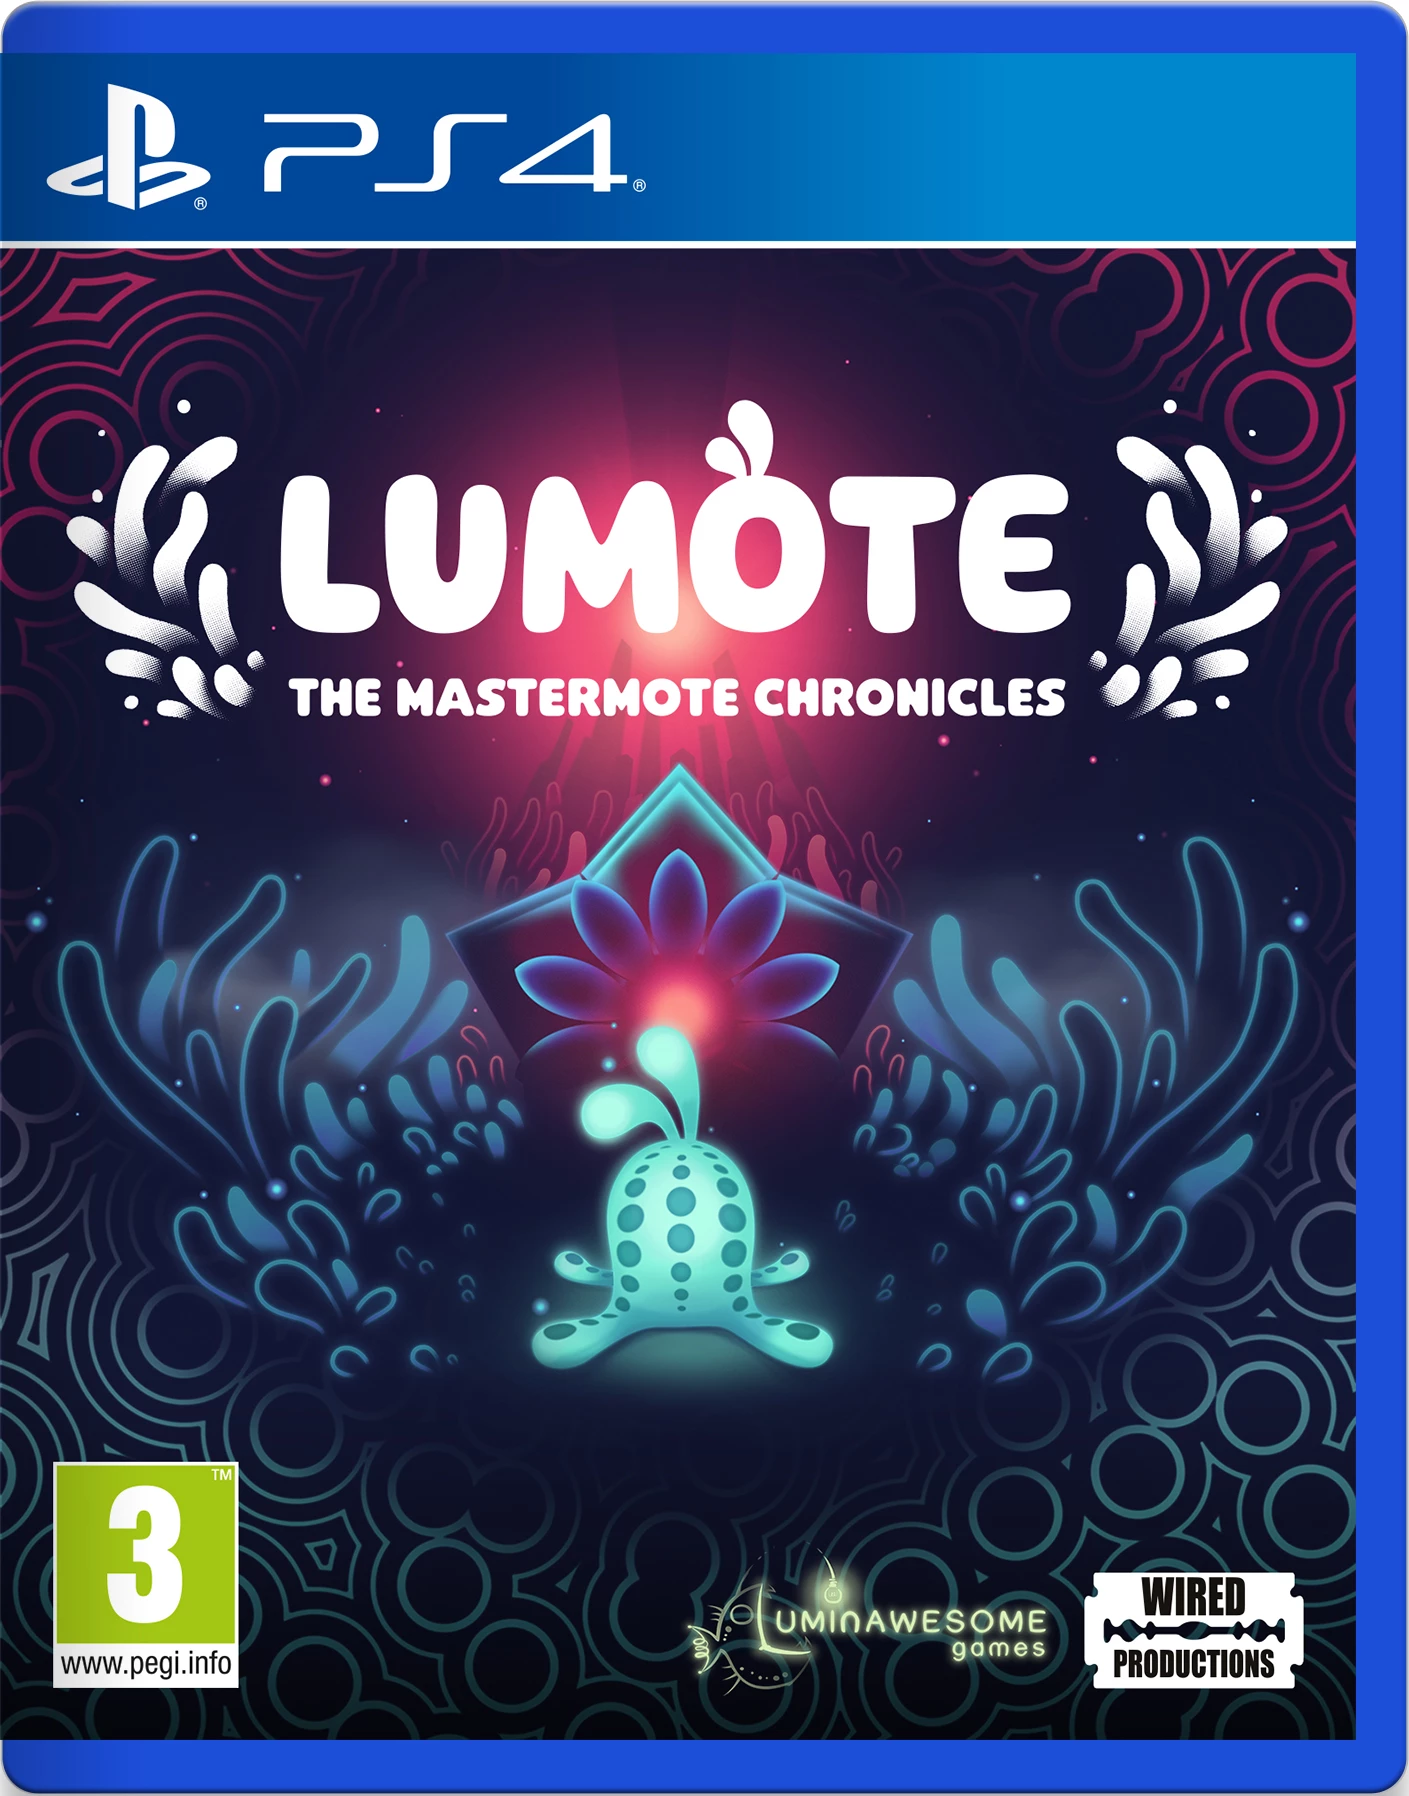 Lumote: The Mastermote Chronicles (PS4), Wired Productions